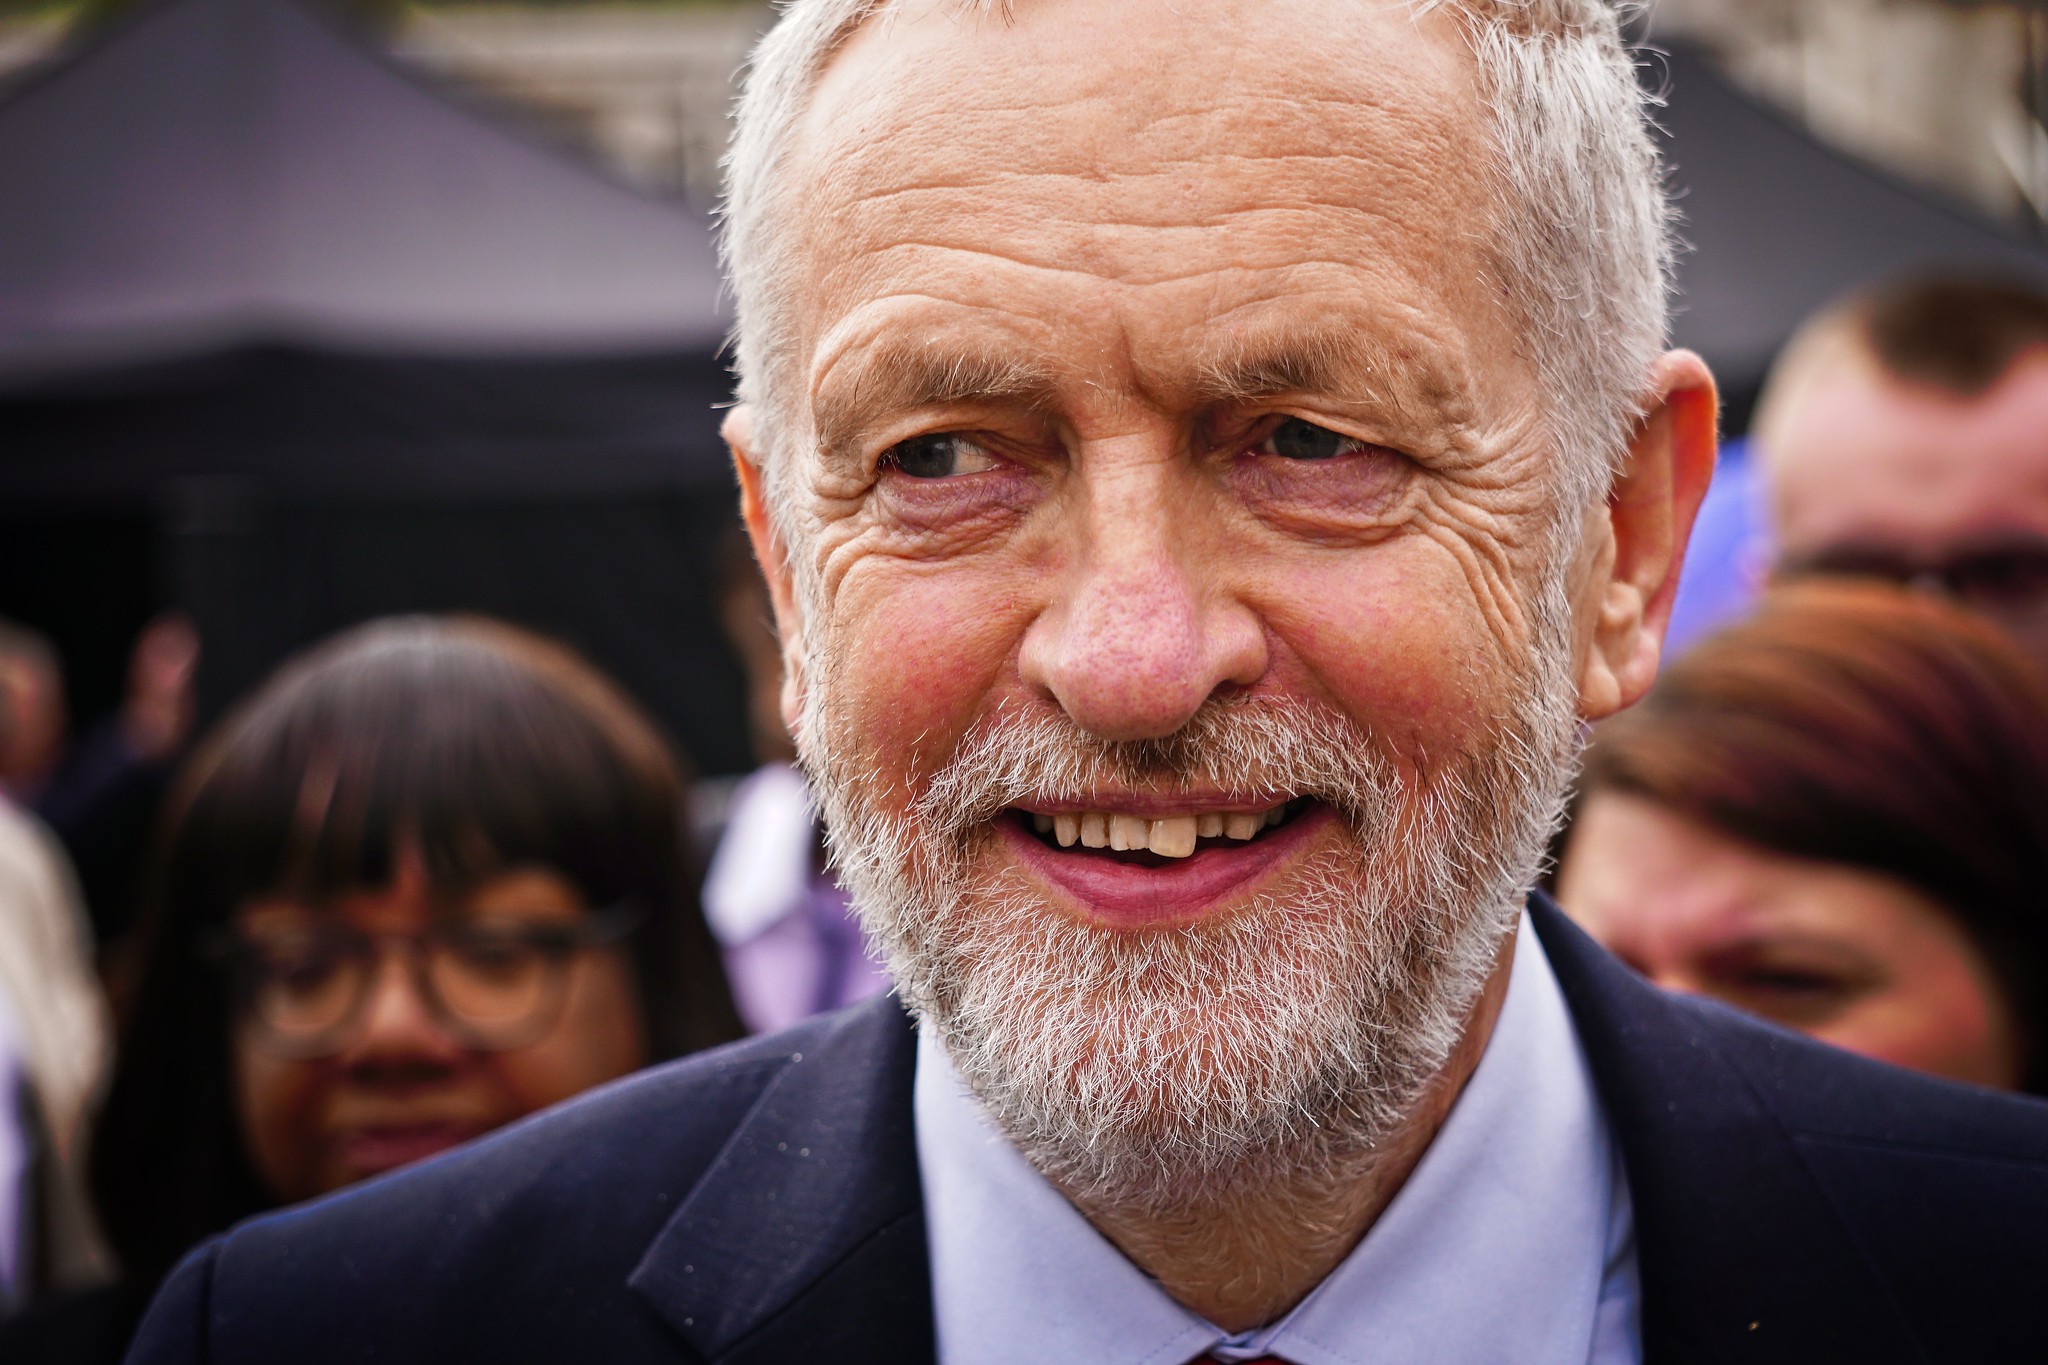 Human Rights Watchdog To Investigate Labour Party Anti-Semitism Allegations